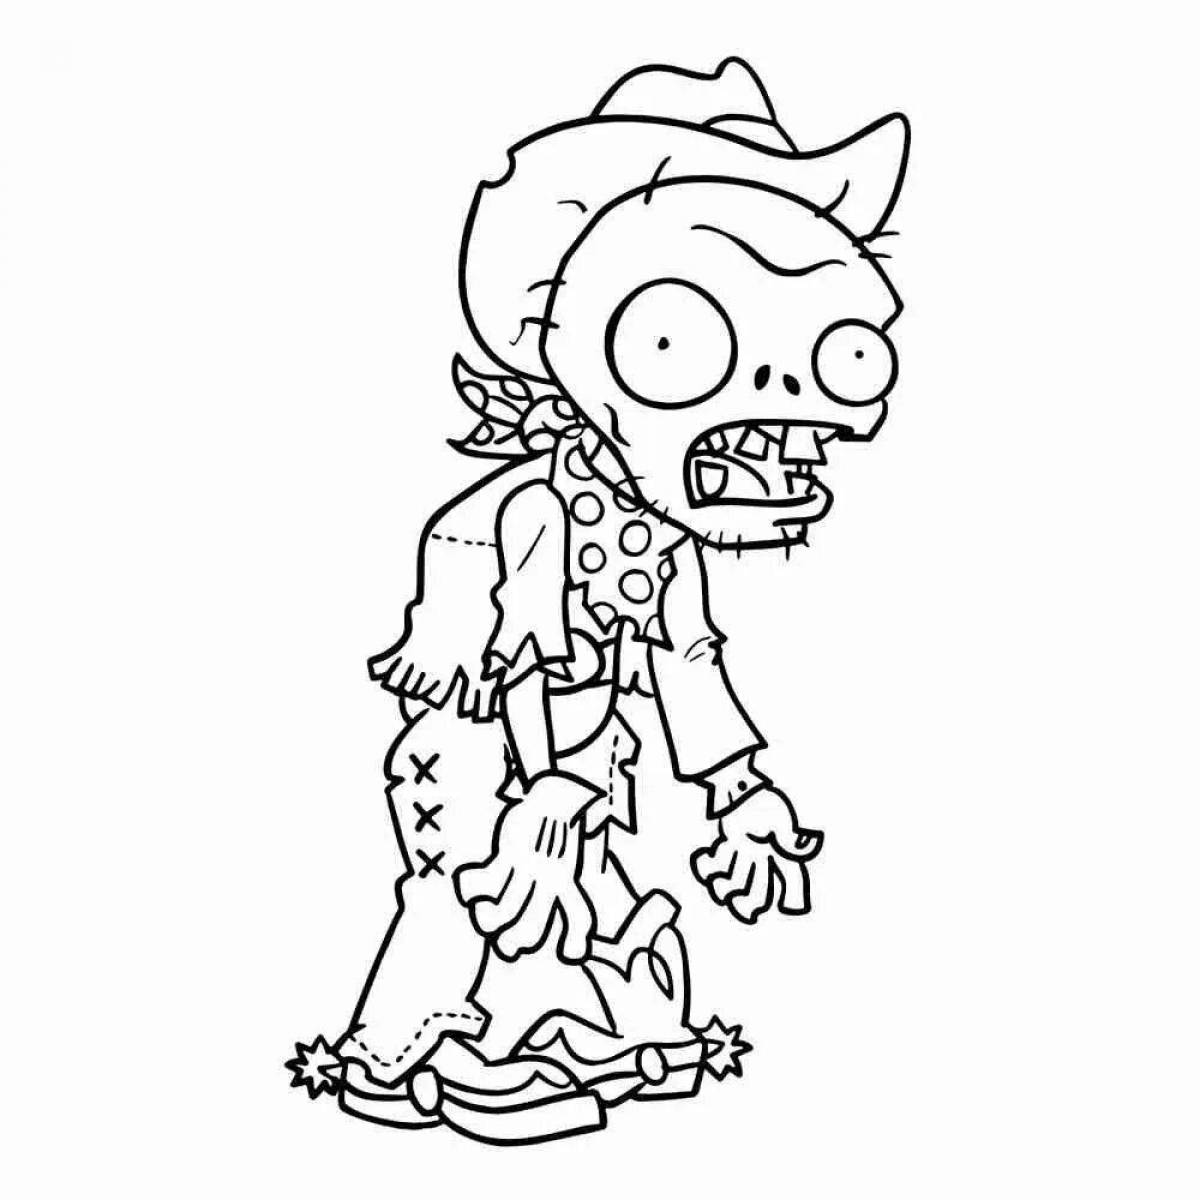 Attractive zombie catcher coloring page